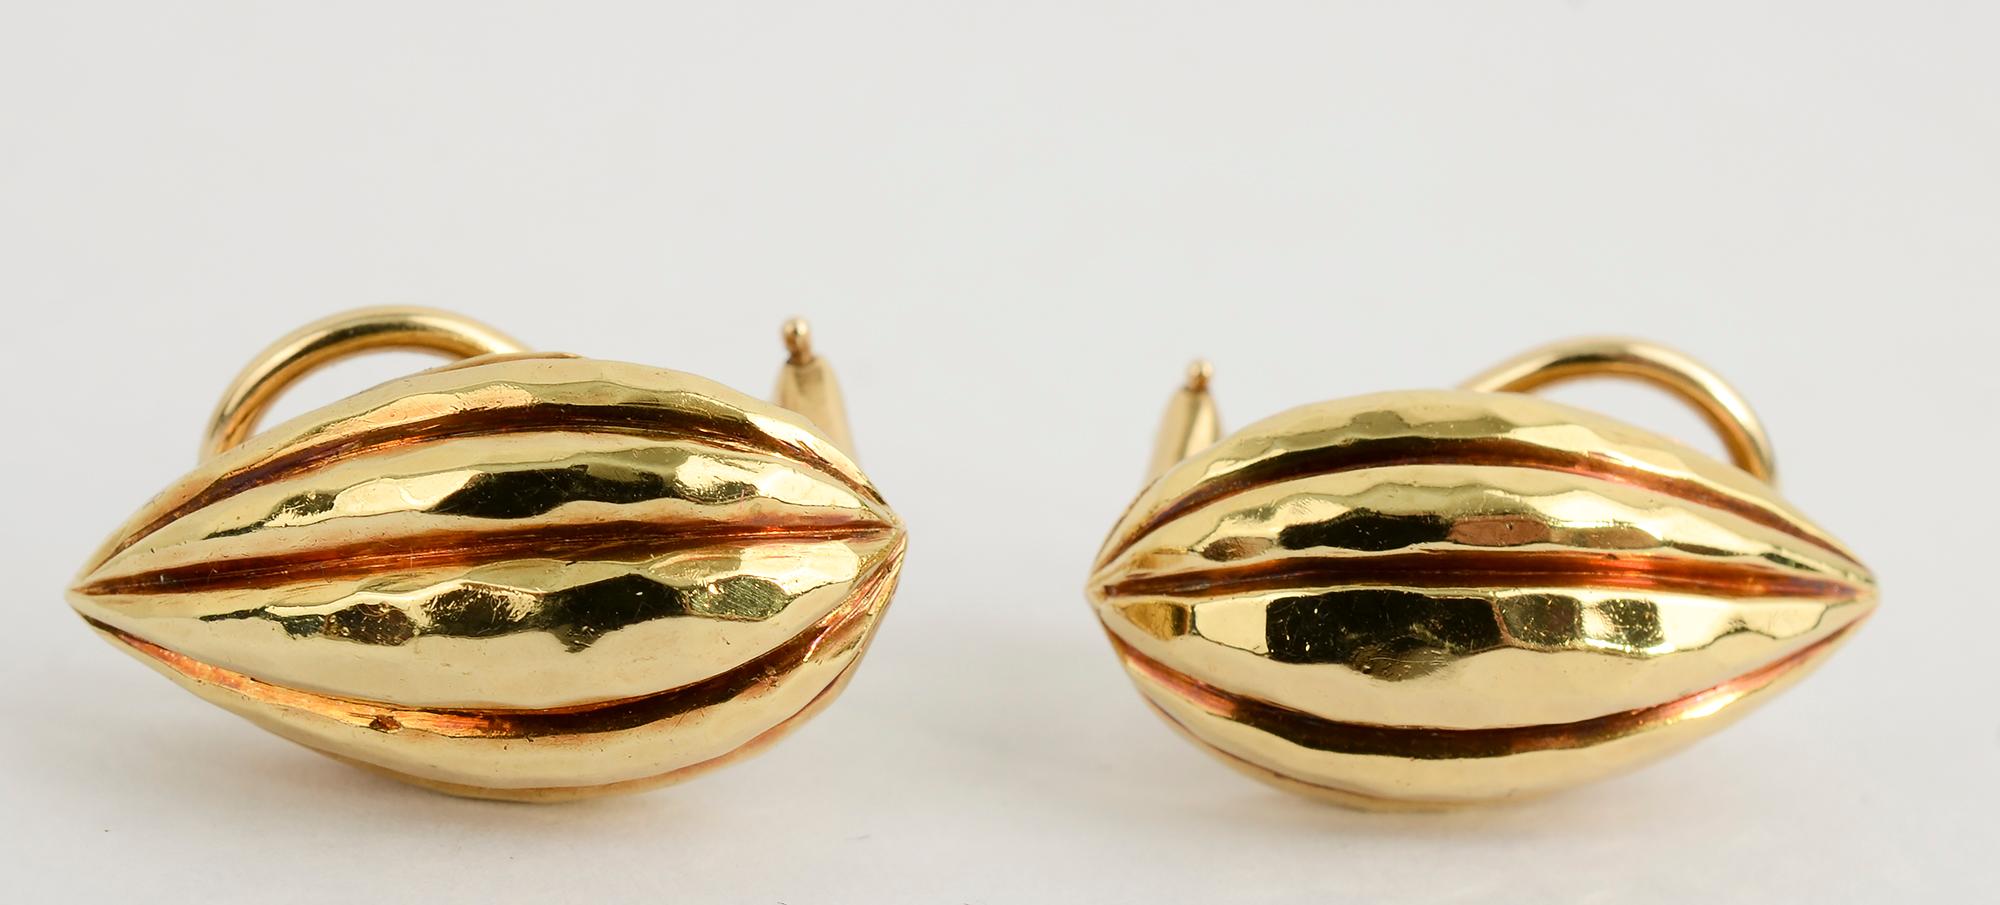 Pear shaped earrings by American designer, Henry Dunay. The earrings are made with one of his signature finishes in hammered gold. Measurements are 7/16